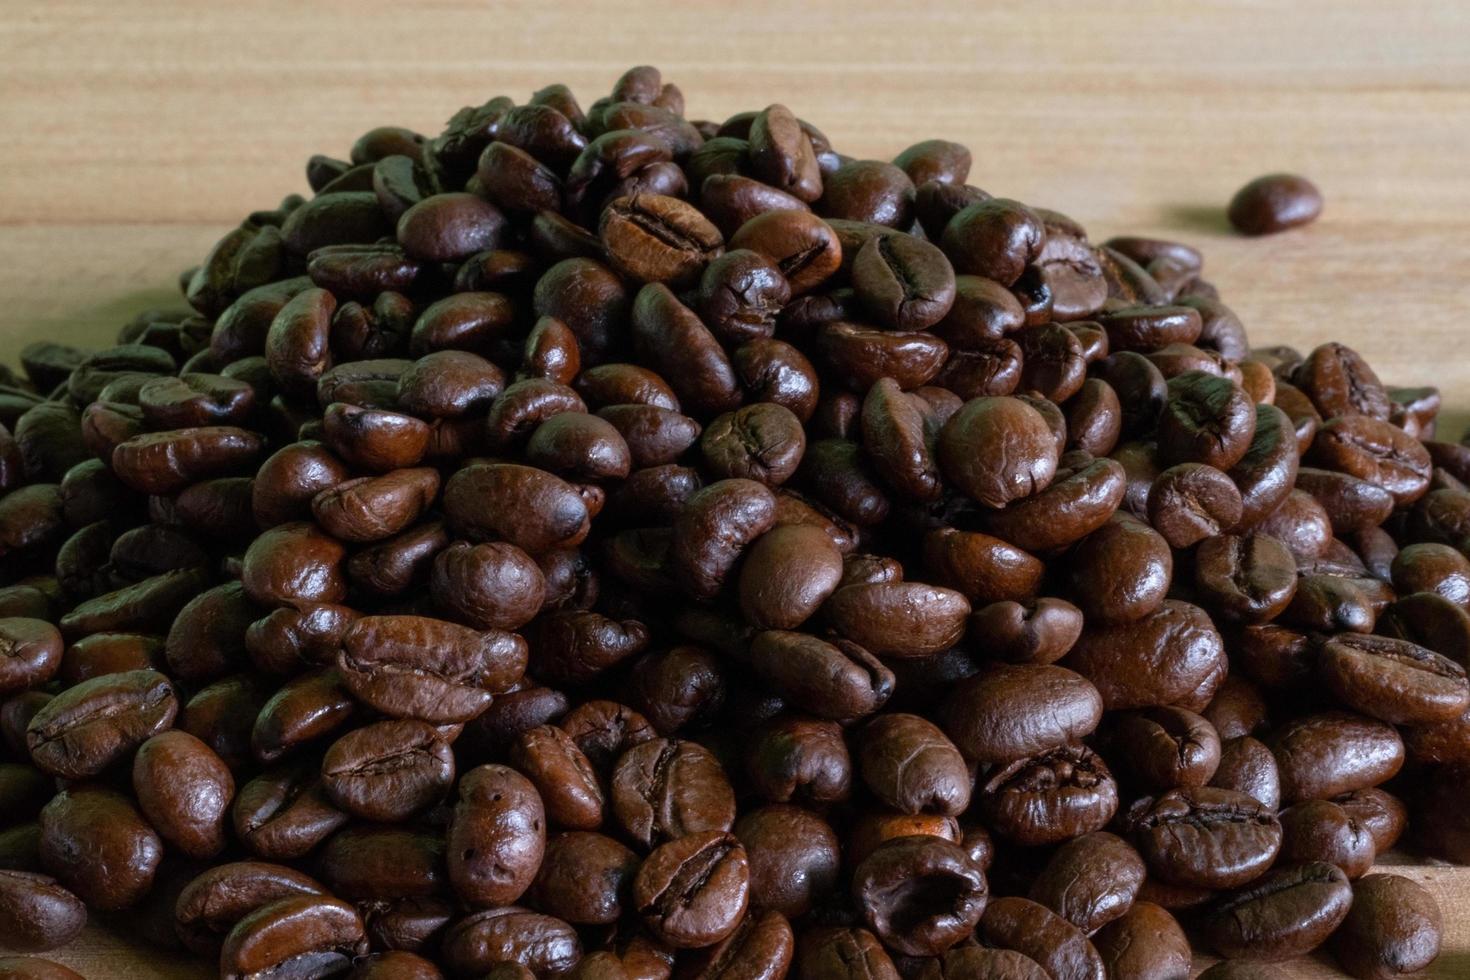 Pile of coffee beans photo